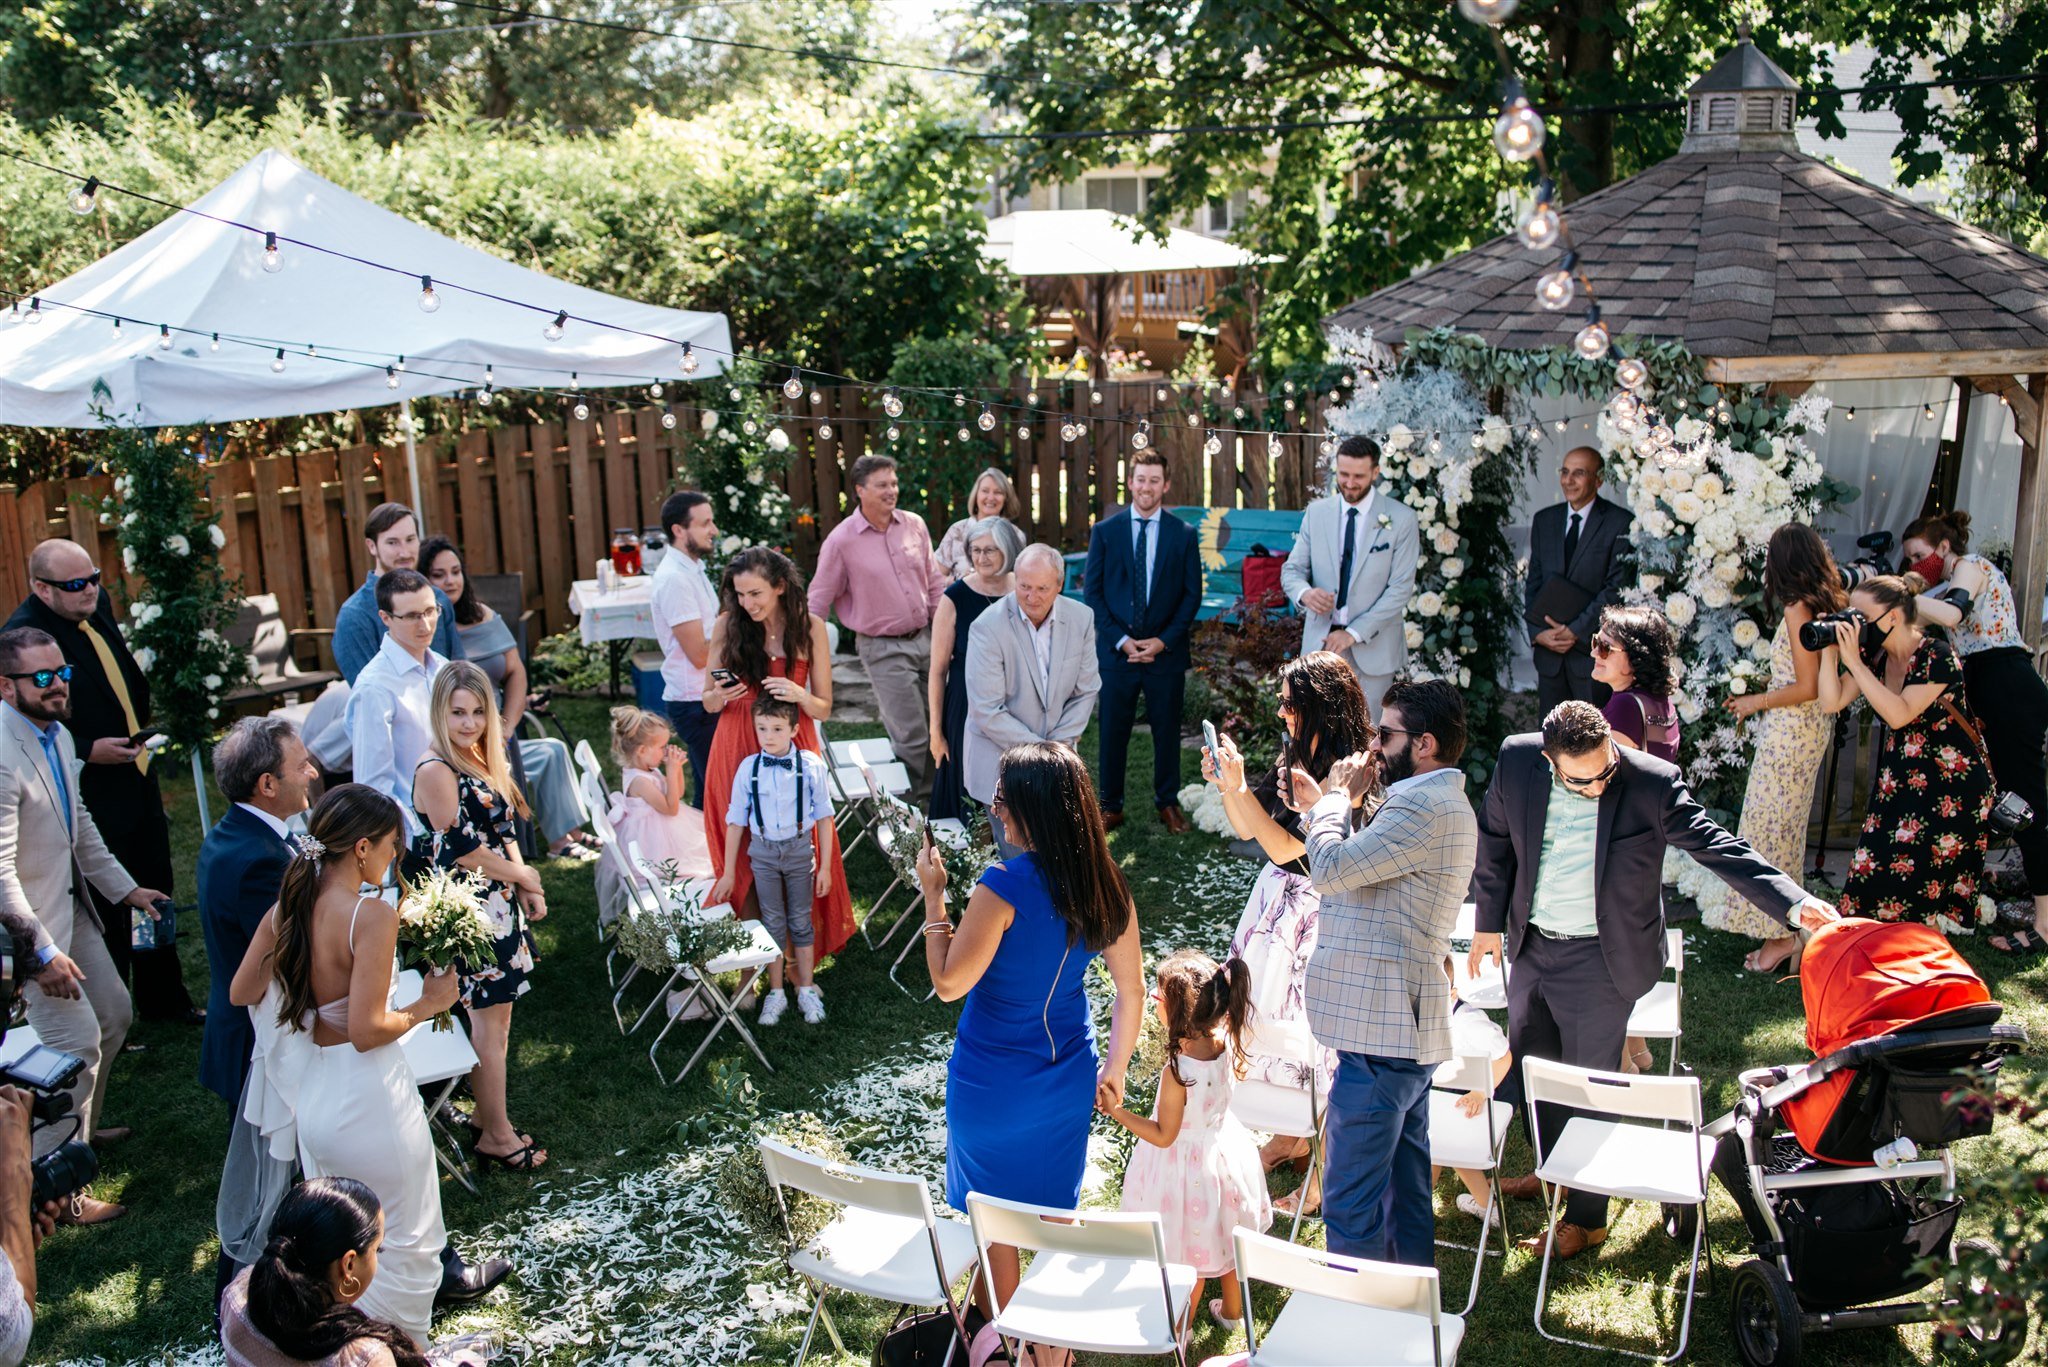 Family gathered at intimate backyard wedding in Montreal.